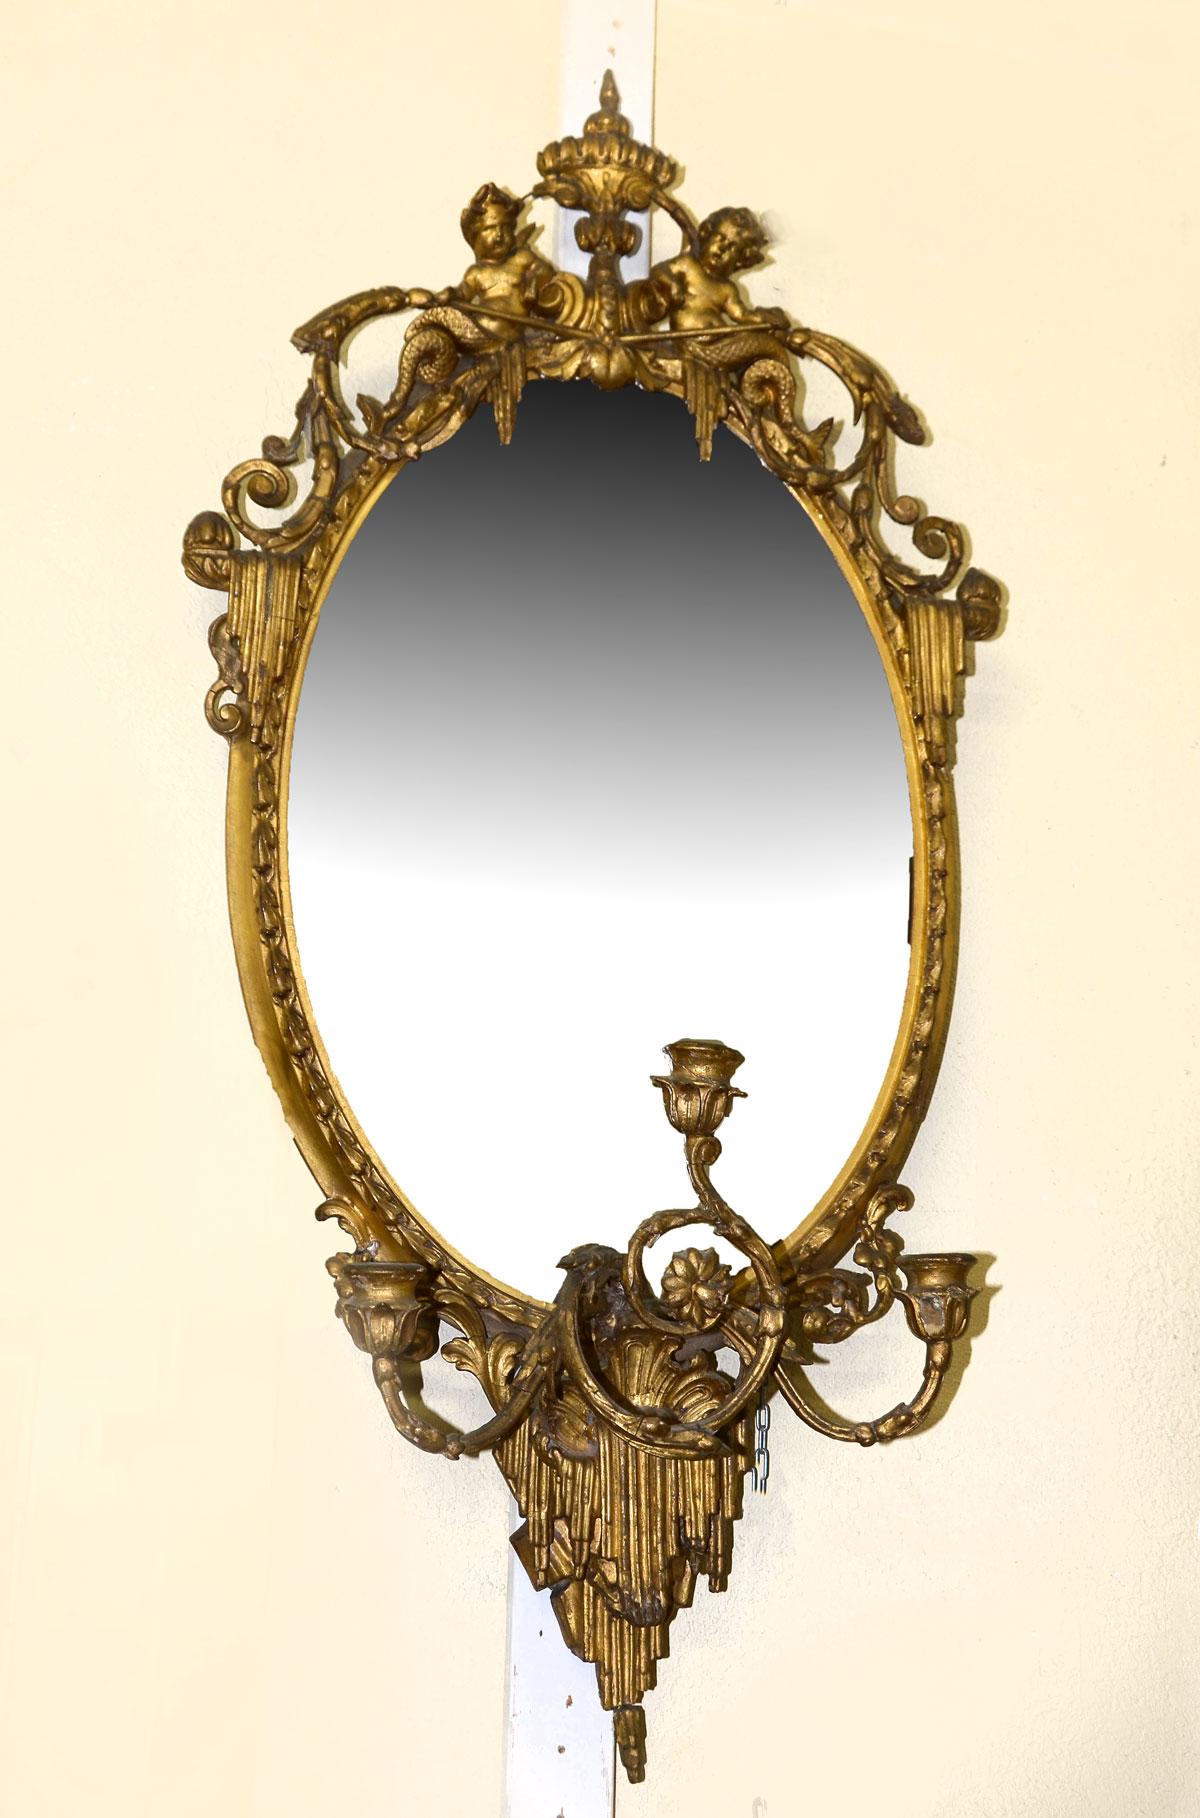 CARVED WALL MIRROR WITH CHERUBIC CREST: